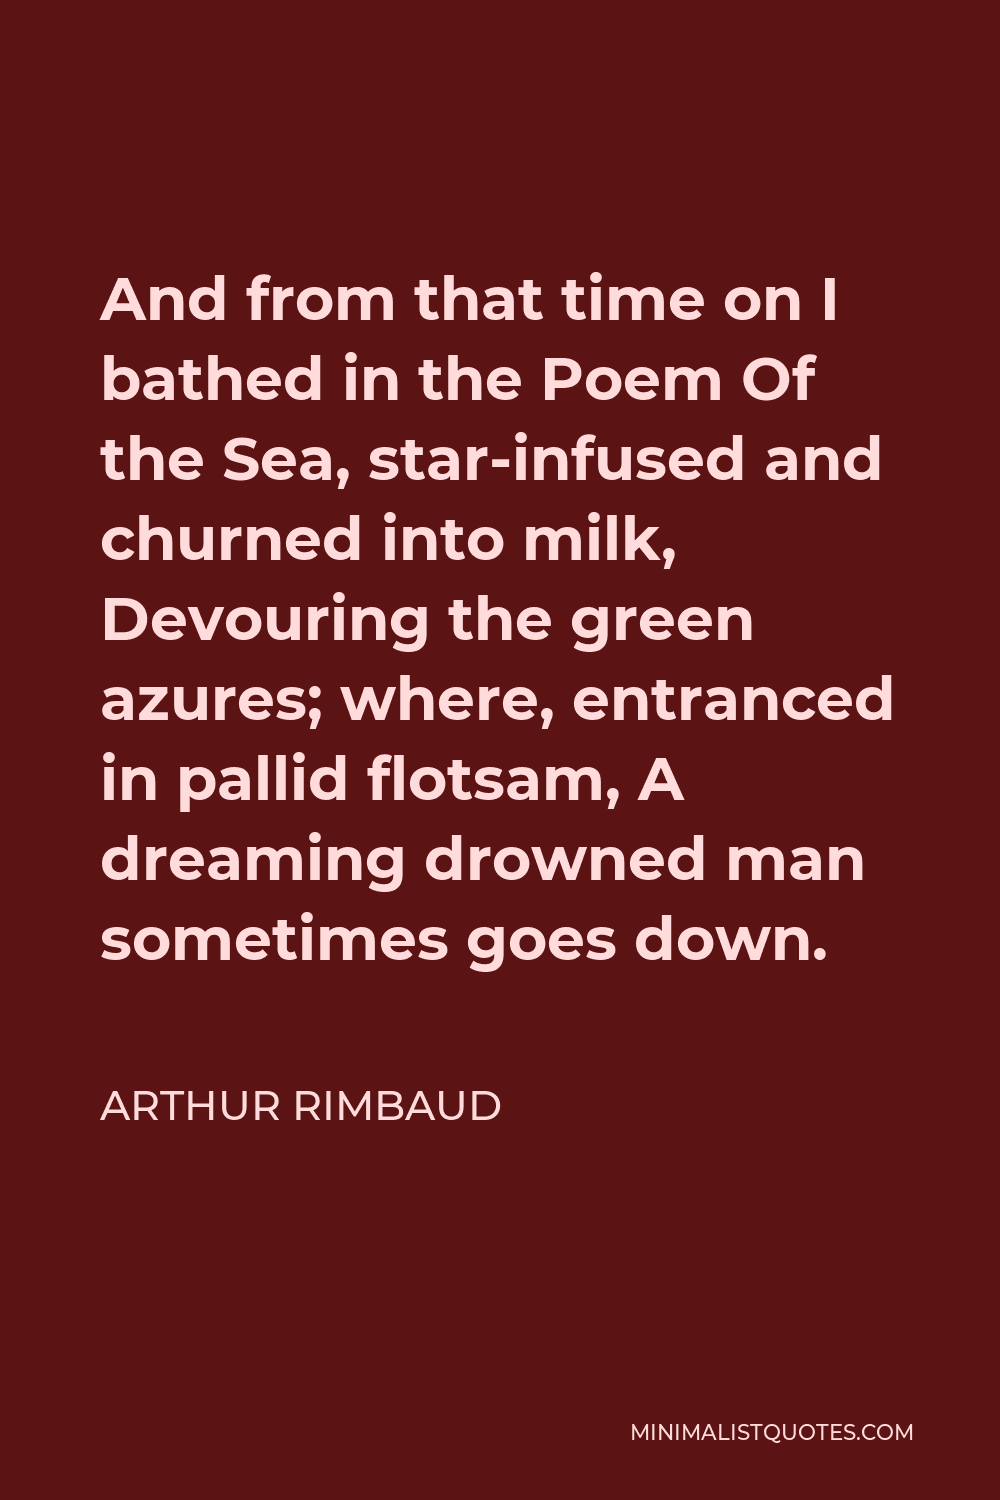 Arthur Rimbaud Quote - And from that time on I bathed in the Poem Of the Sea, star-infused and churned into milk, Devouring the green azures; where, entranced in pallid flotsam, A dreaming drowned man sometimes goes down.